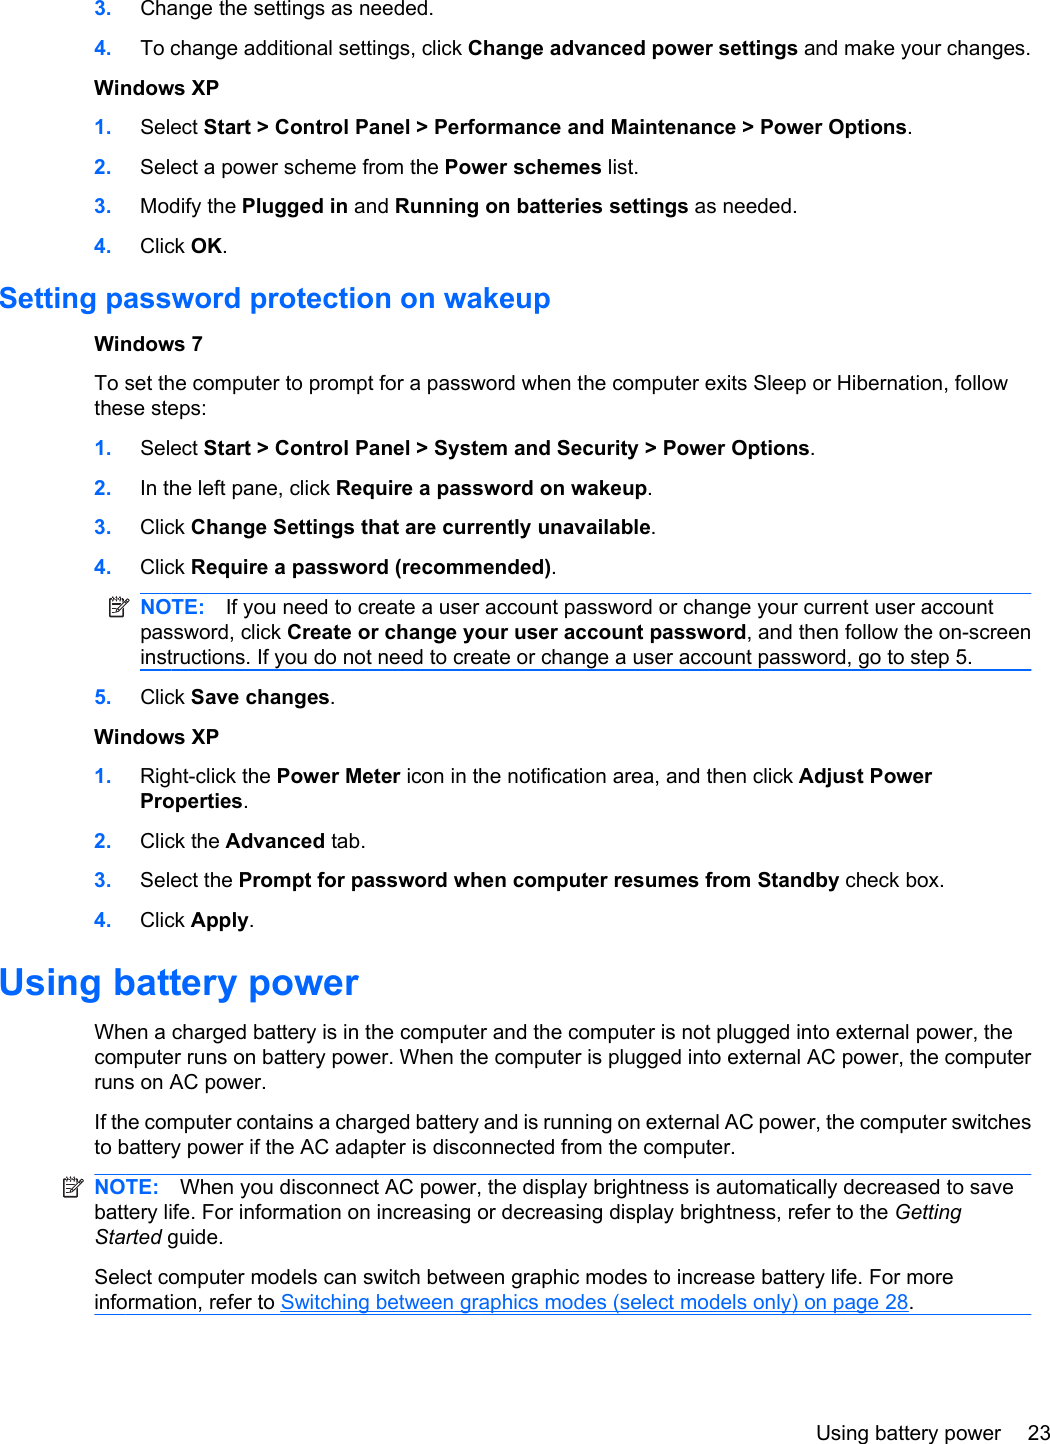 3. Change the settings as needed.4. To change additional settings, click Change advanced power settings and make your changes.Windows XP1. Select Start &gt; Control Panel &gt; Performance and Maintenance &gt; Power Options.2. Select a power scheme from the Power schemes list.3. Modify the Plugged in and Running on batteries settings as needed.4. Click OK.Setting password protection on wakeupWindows 7To set the computer to prompt for a password when the computer exits Sleep or Hibernation, followthese steps:1. Select Start &gt; Control Panel &gt; System and Security &gt; Power Options.2. In the left pane, click Require a password on wakeup.3. Click Change Settings that are currently unavailable.4. Click Require a password (recommended).NOTE: If you need to create a user account password or change your current user accountpassword, click Create or change your user account password, and then follow the on-screeninstructions. If you do not need to create or change a user account password, go to step 5.5. Click Save changes.Windows XP1. Right-click the Power Meter icon in the notification area, and then click Adjust PowerProperties.2. Click the Advanced tab.3. Select the Prompt for password when computer resumes from Standby check box.4. Click Apply.Using battery powerWhen a charged battery is in the computer and the computer is not plugged into external power, thecomputer runs on battery power. When the computer is plugged into external AC power, the computerruns on AC power.If the computer contains a charged battery and is running on external AC power, the computer switchesto battery power if the AC adapter is disconnected from the computer.NOTE: When you disconnect AC power, the display brightness is automatically decreased to savebattery life. For information on increasing or decreasing display brightness, refer to the GettingStarted guide.Select computer models can switch between graphic modes to increase battery life. For moreinformation, refer to Switching between graphics modes (select models only) on page 28.Using battery power 23